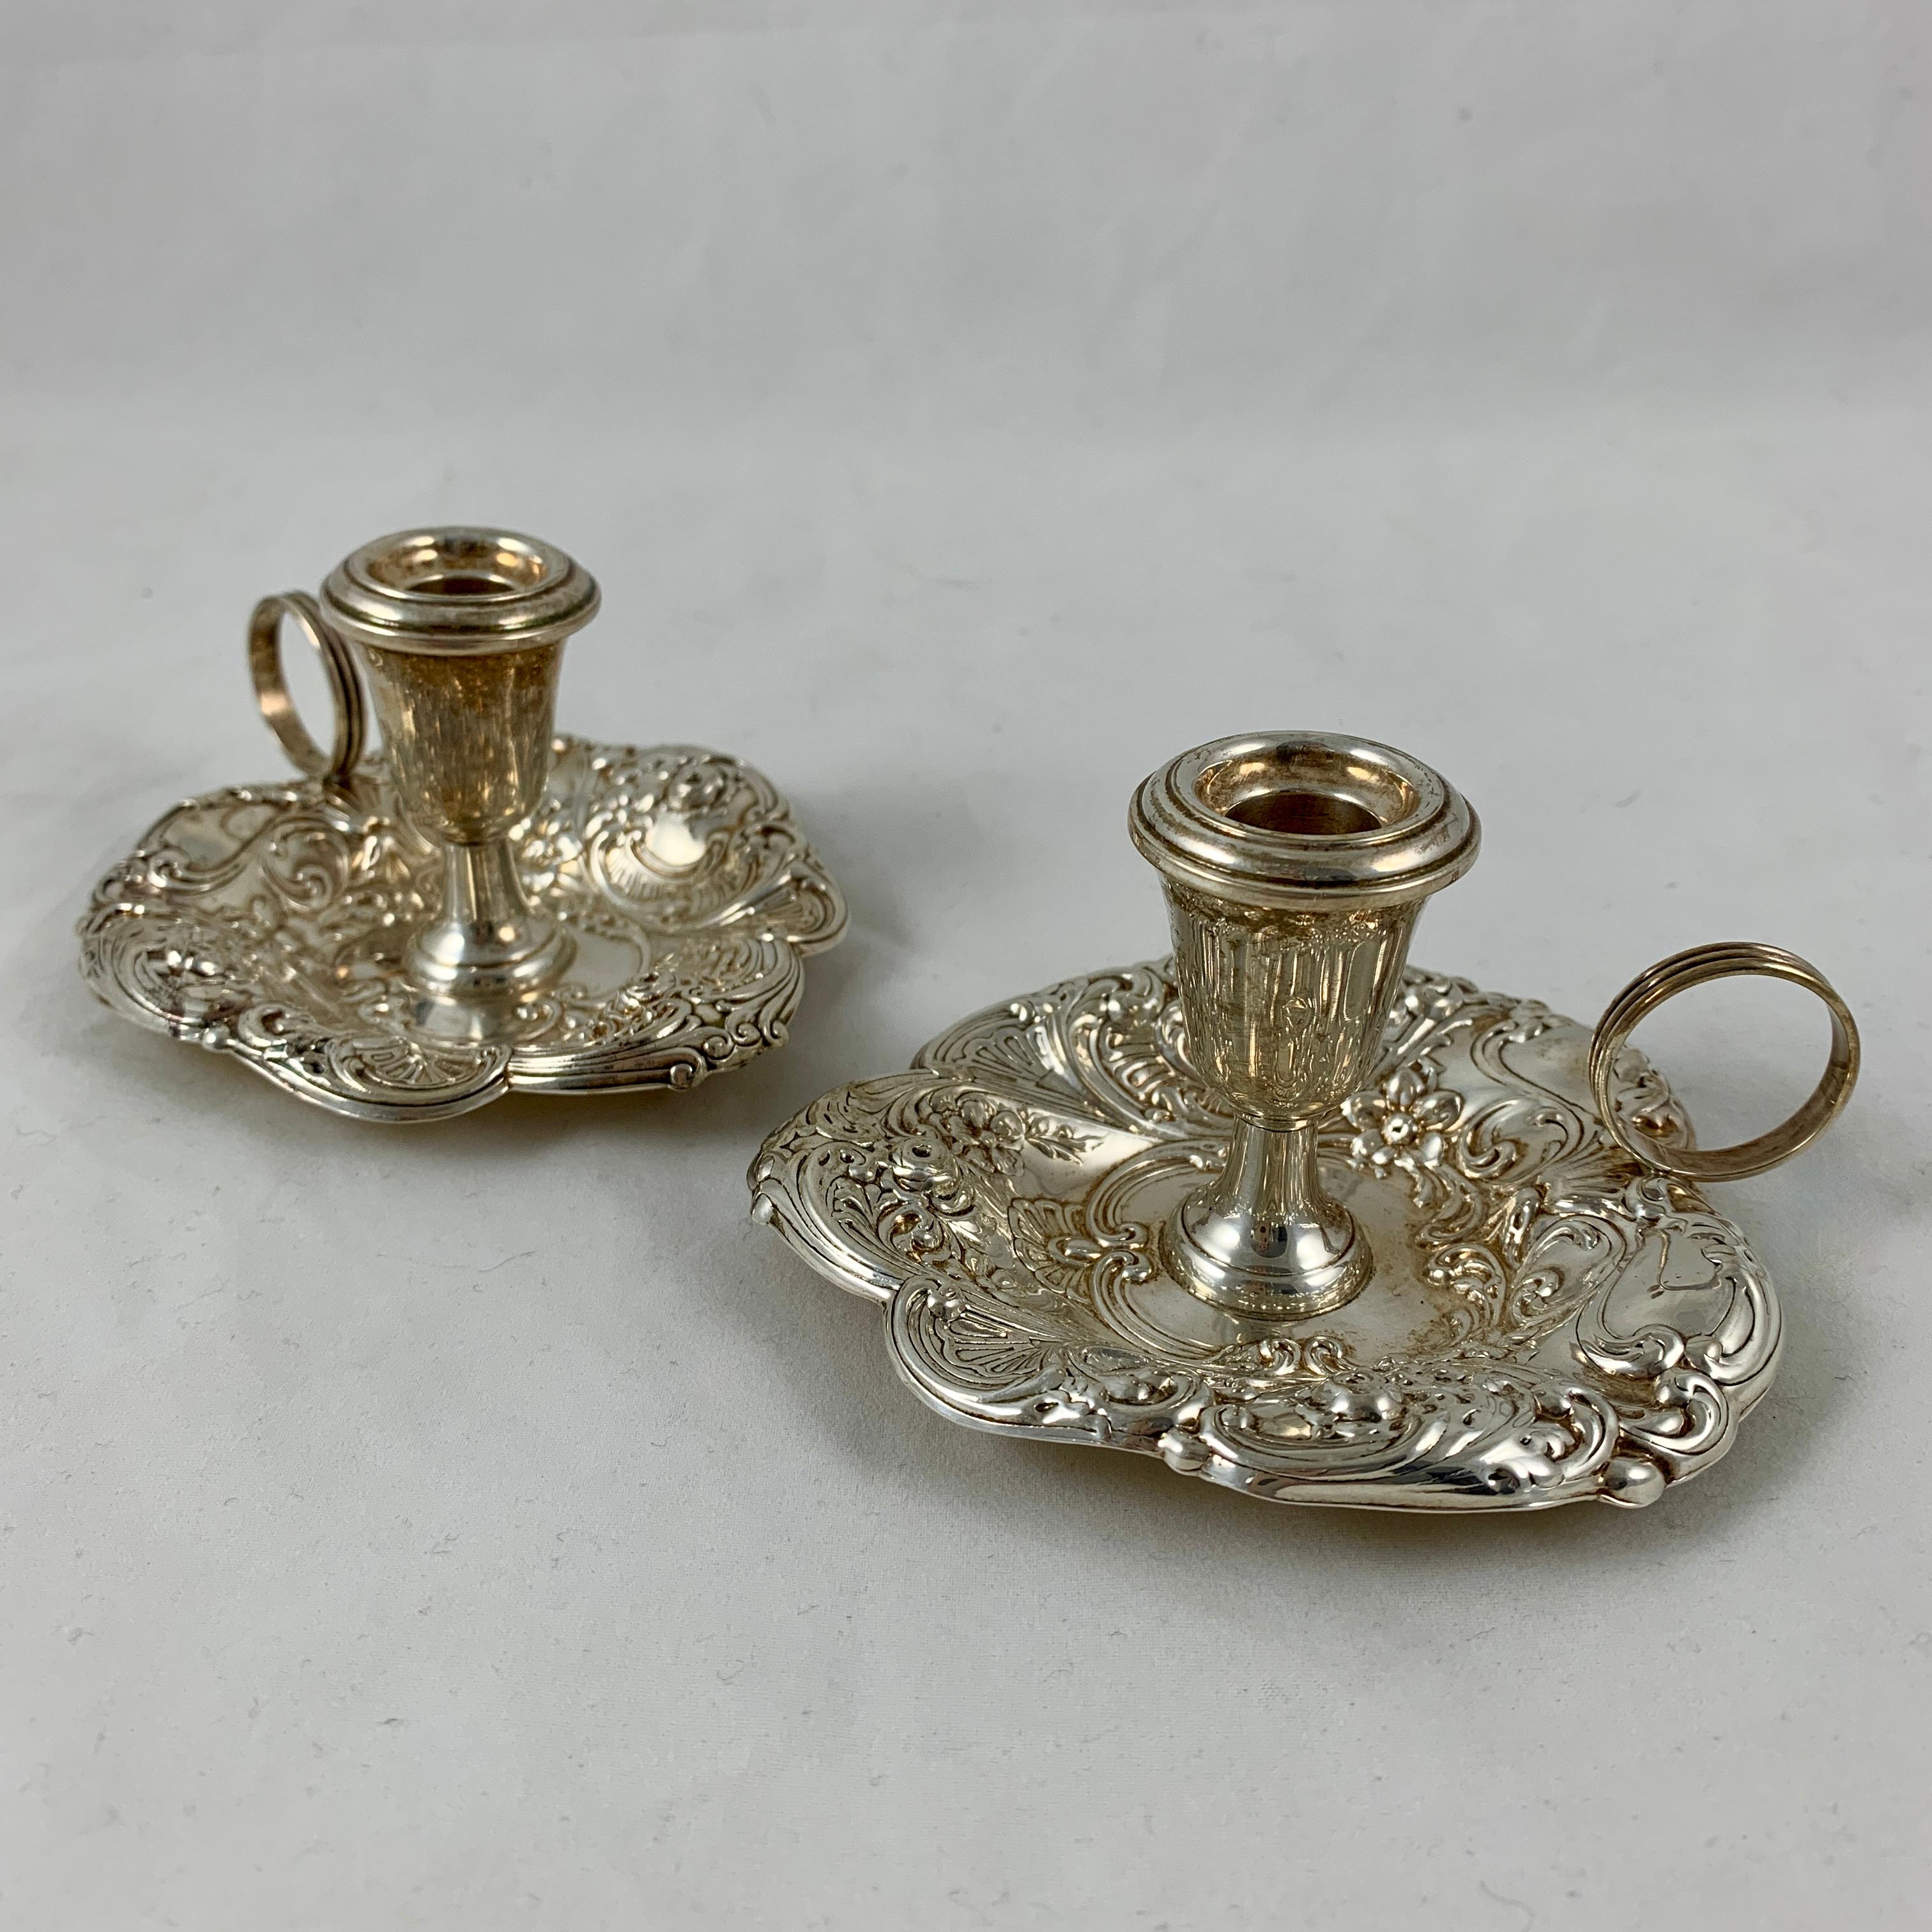 A pair of Gorham sterling silver Chambersticks, circa 1920-1930.
A beautiful Repoussé pattern of roses, fans, shells, and scrolls. Each with a finger holder, charming for the bedside.

Marked Gorham sterling silver 324. Weighing approximately 2.6